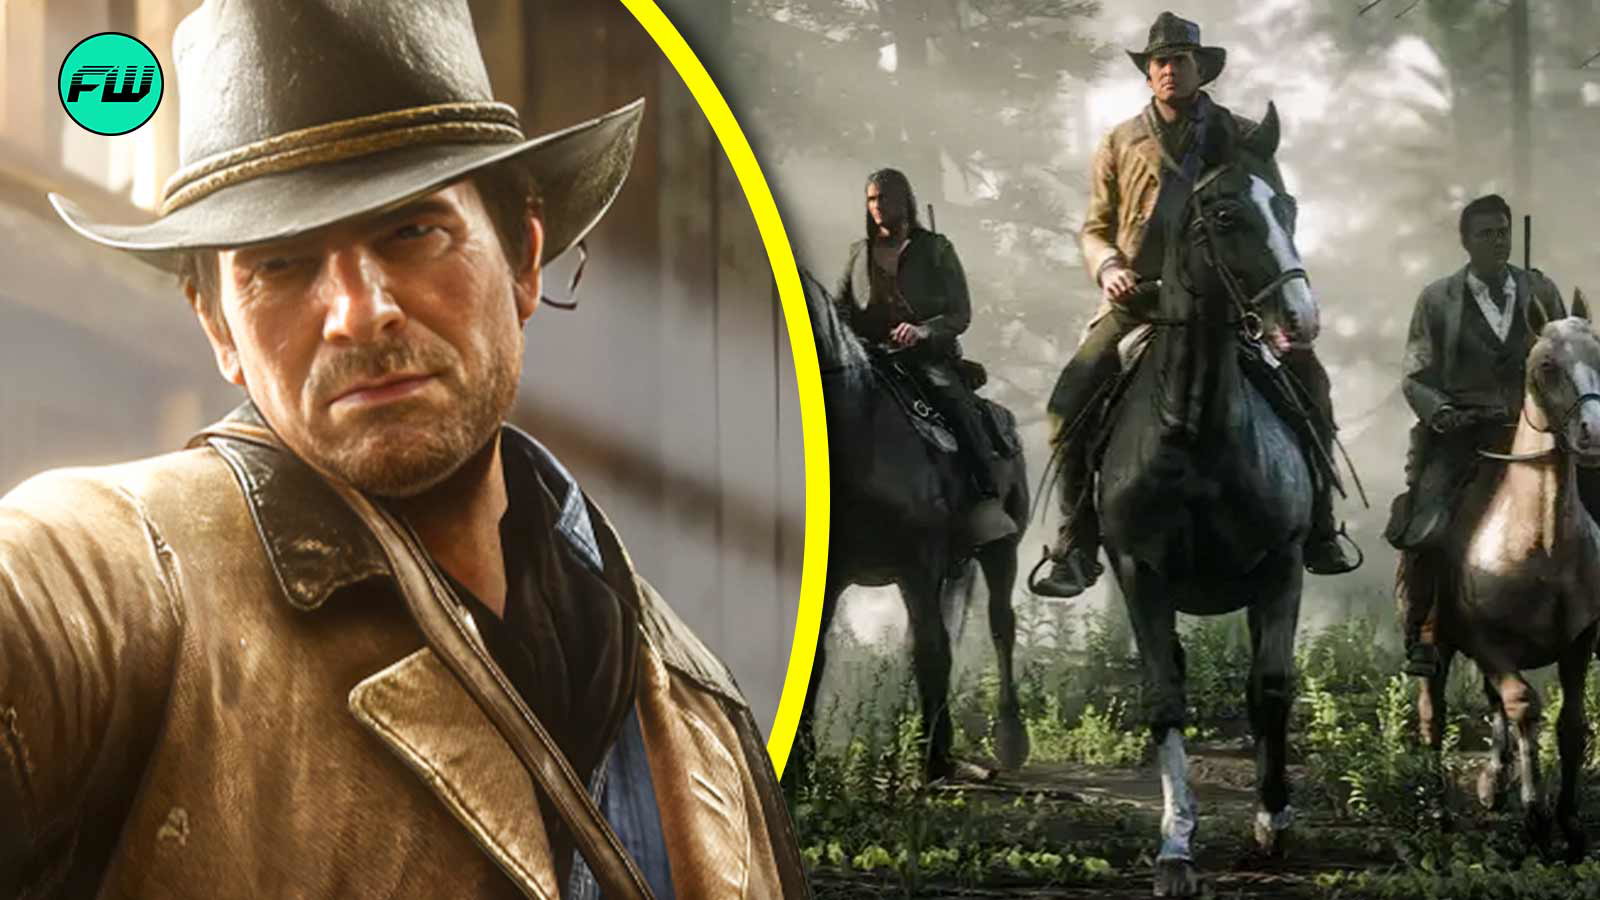 “What the hell is this thing and why was I chased…”: Some Red Dead Redemption 2 Players Are Only Now Finding Out About the Game’s Best Easter Egg 6 Years On